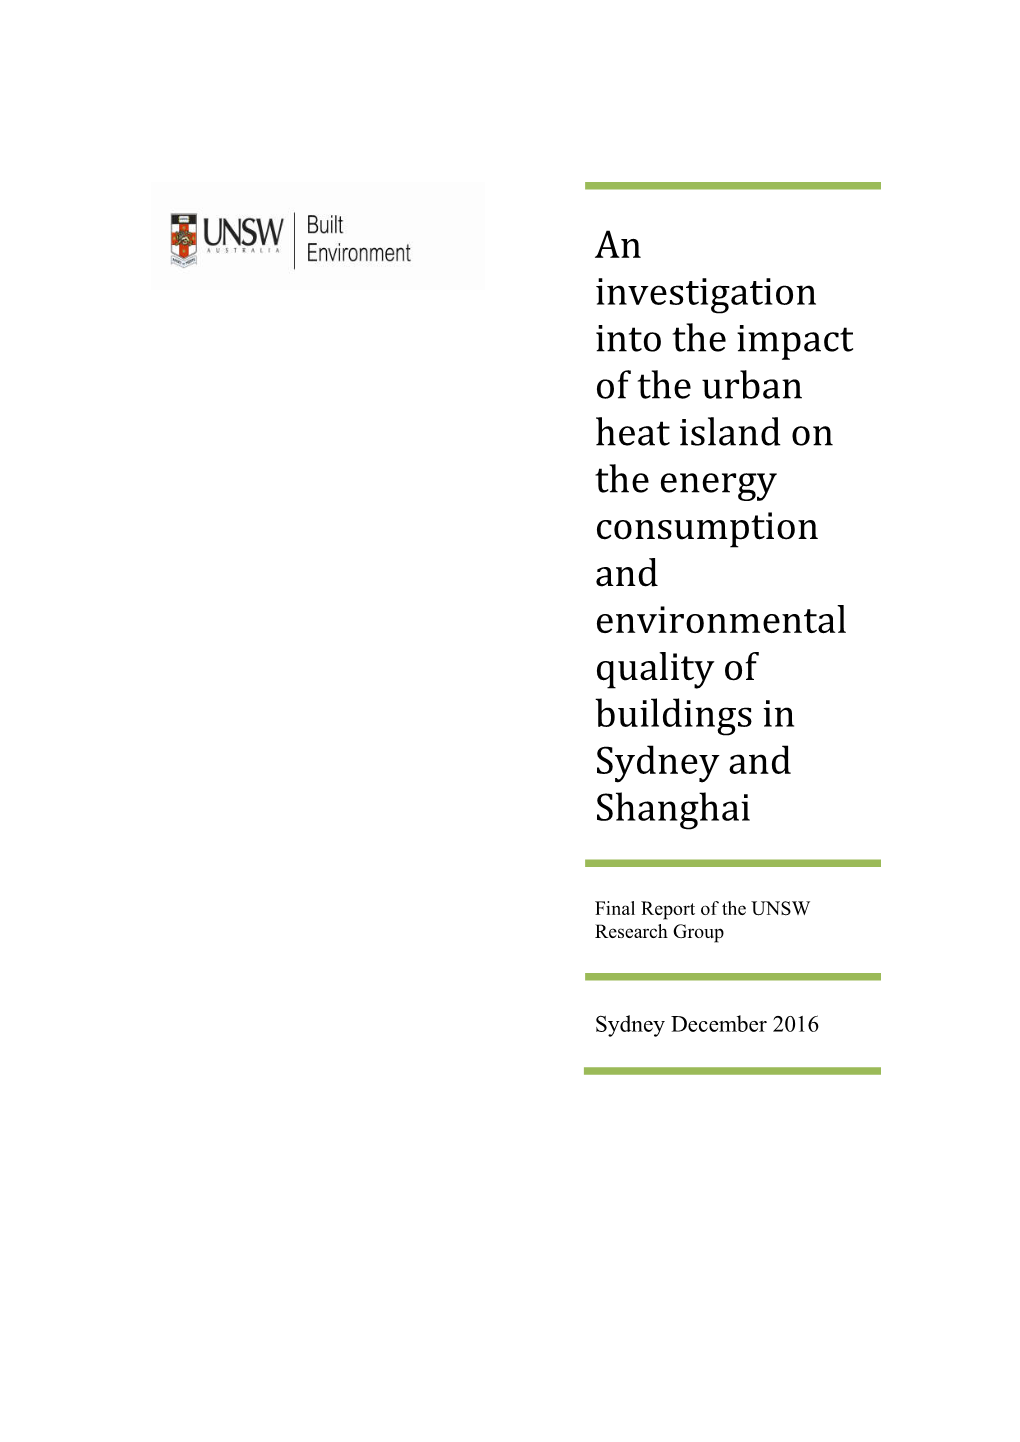 An Investigation Into the Impact of the Urban Heat Island on the Energy Consumption and Environmental Quality of Buildings in Sydney and Shanghai